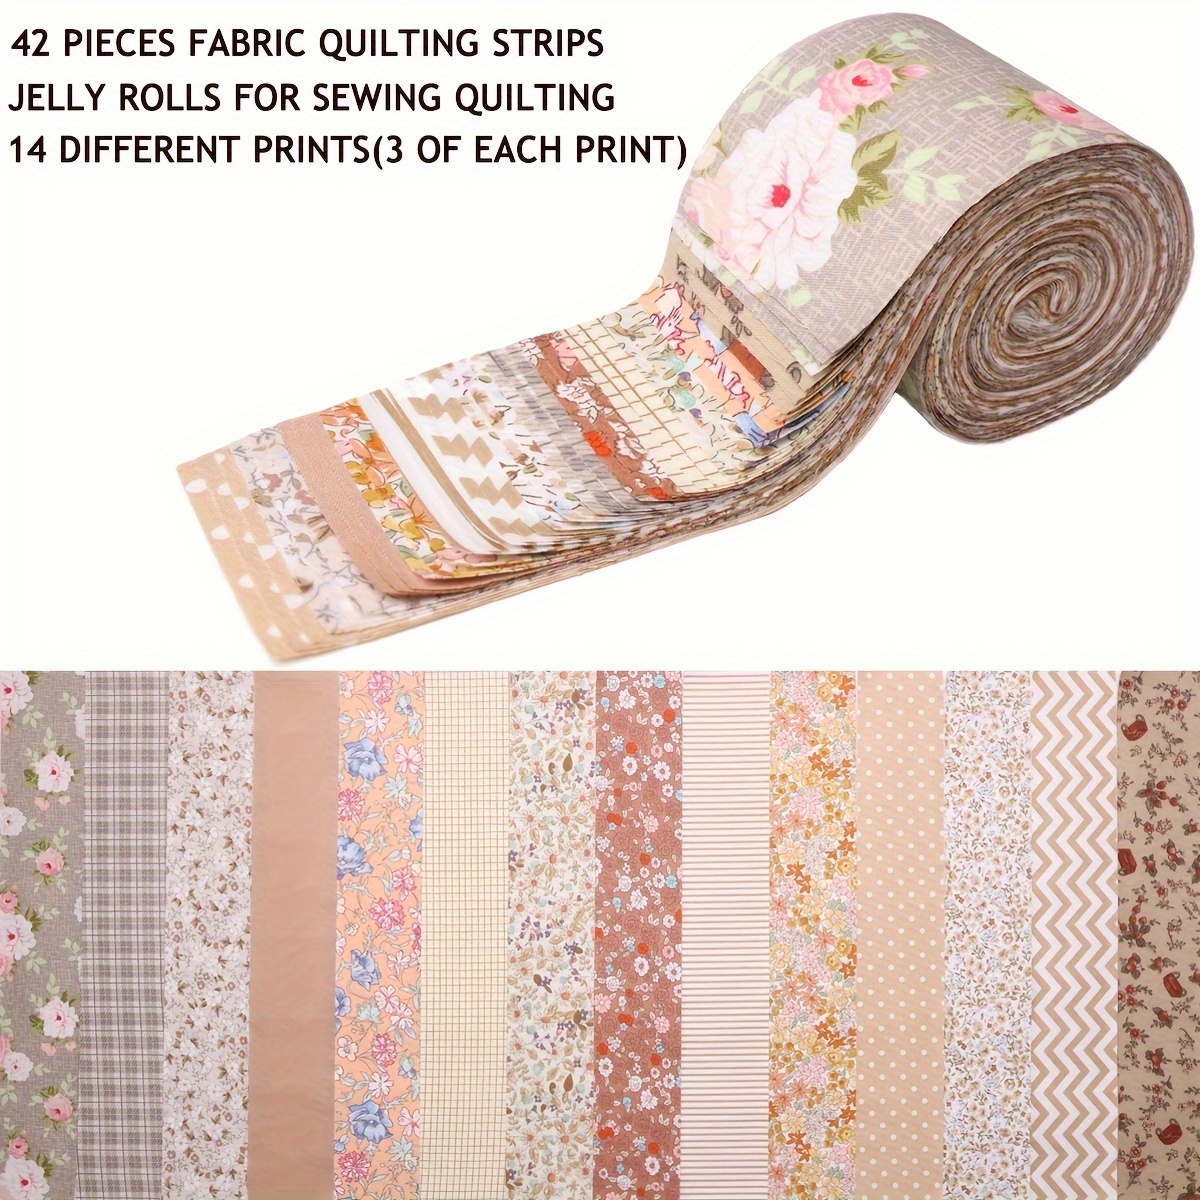 

42-piece Cotton Quilting Fabric Jelly Rolls, Flower Pattern Precut Strips, 100% Cotton Fabric Bundle For Sewing, Quilting, Diy Crafts, Hand Wash Only - 14 Designs, 3 Of Each